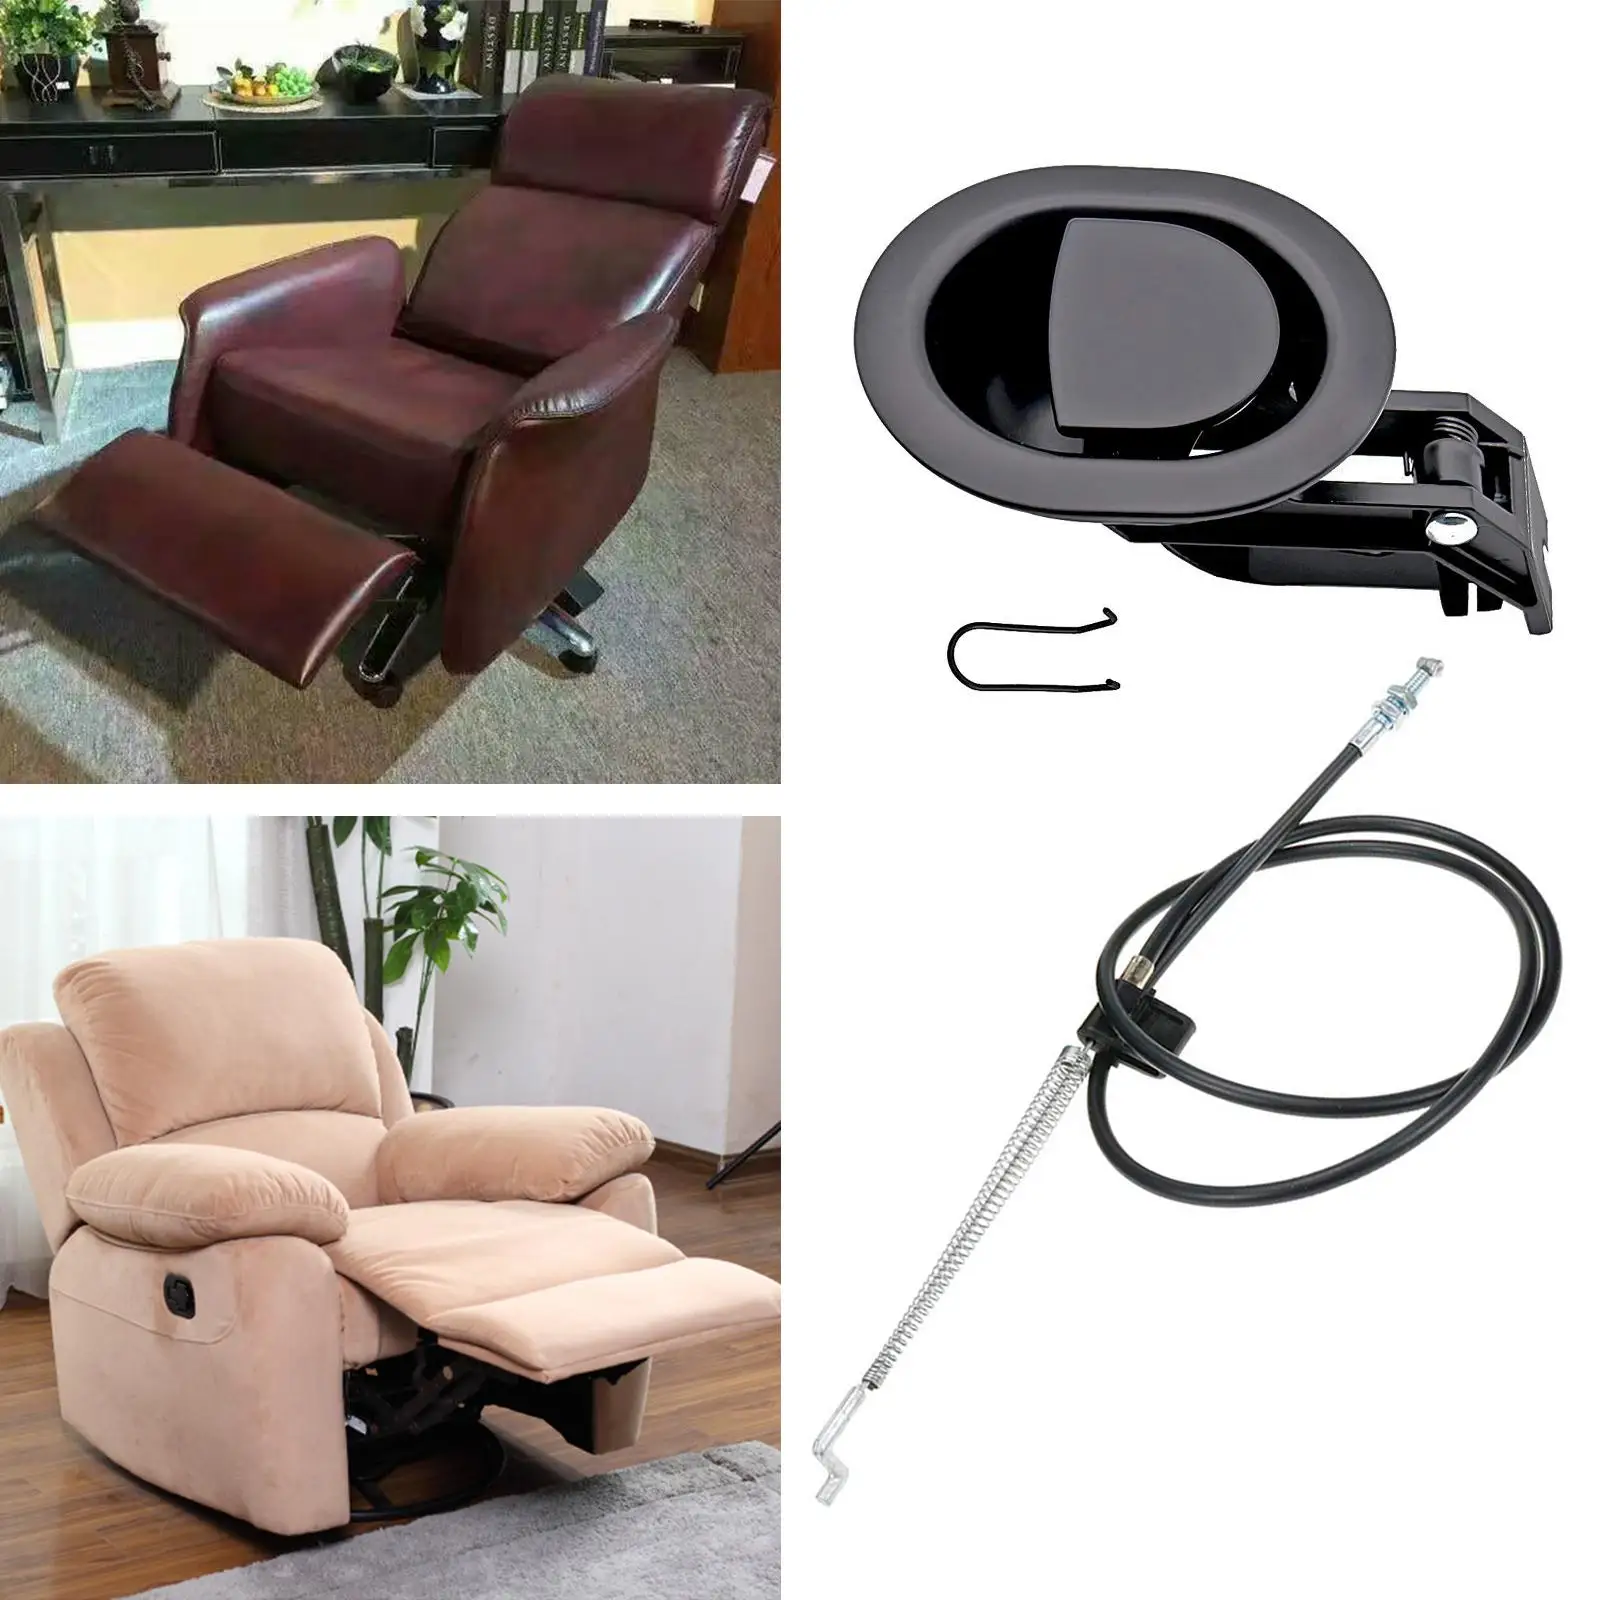 Recliner Handle Replacement Cable Release Handle Parts Sturdy Durable Replacement Recliner Replacement Parts for Chairrecliner